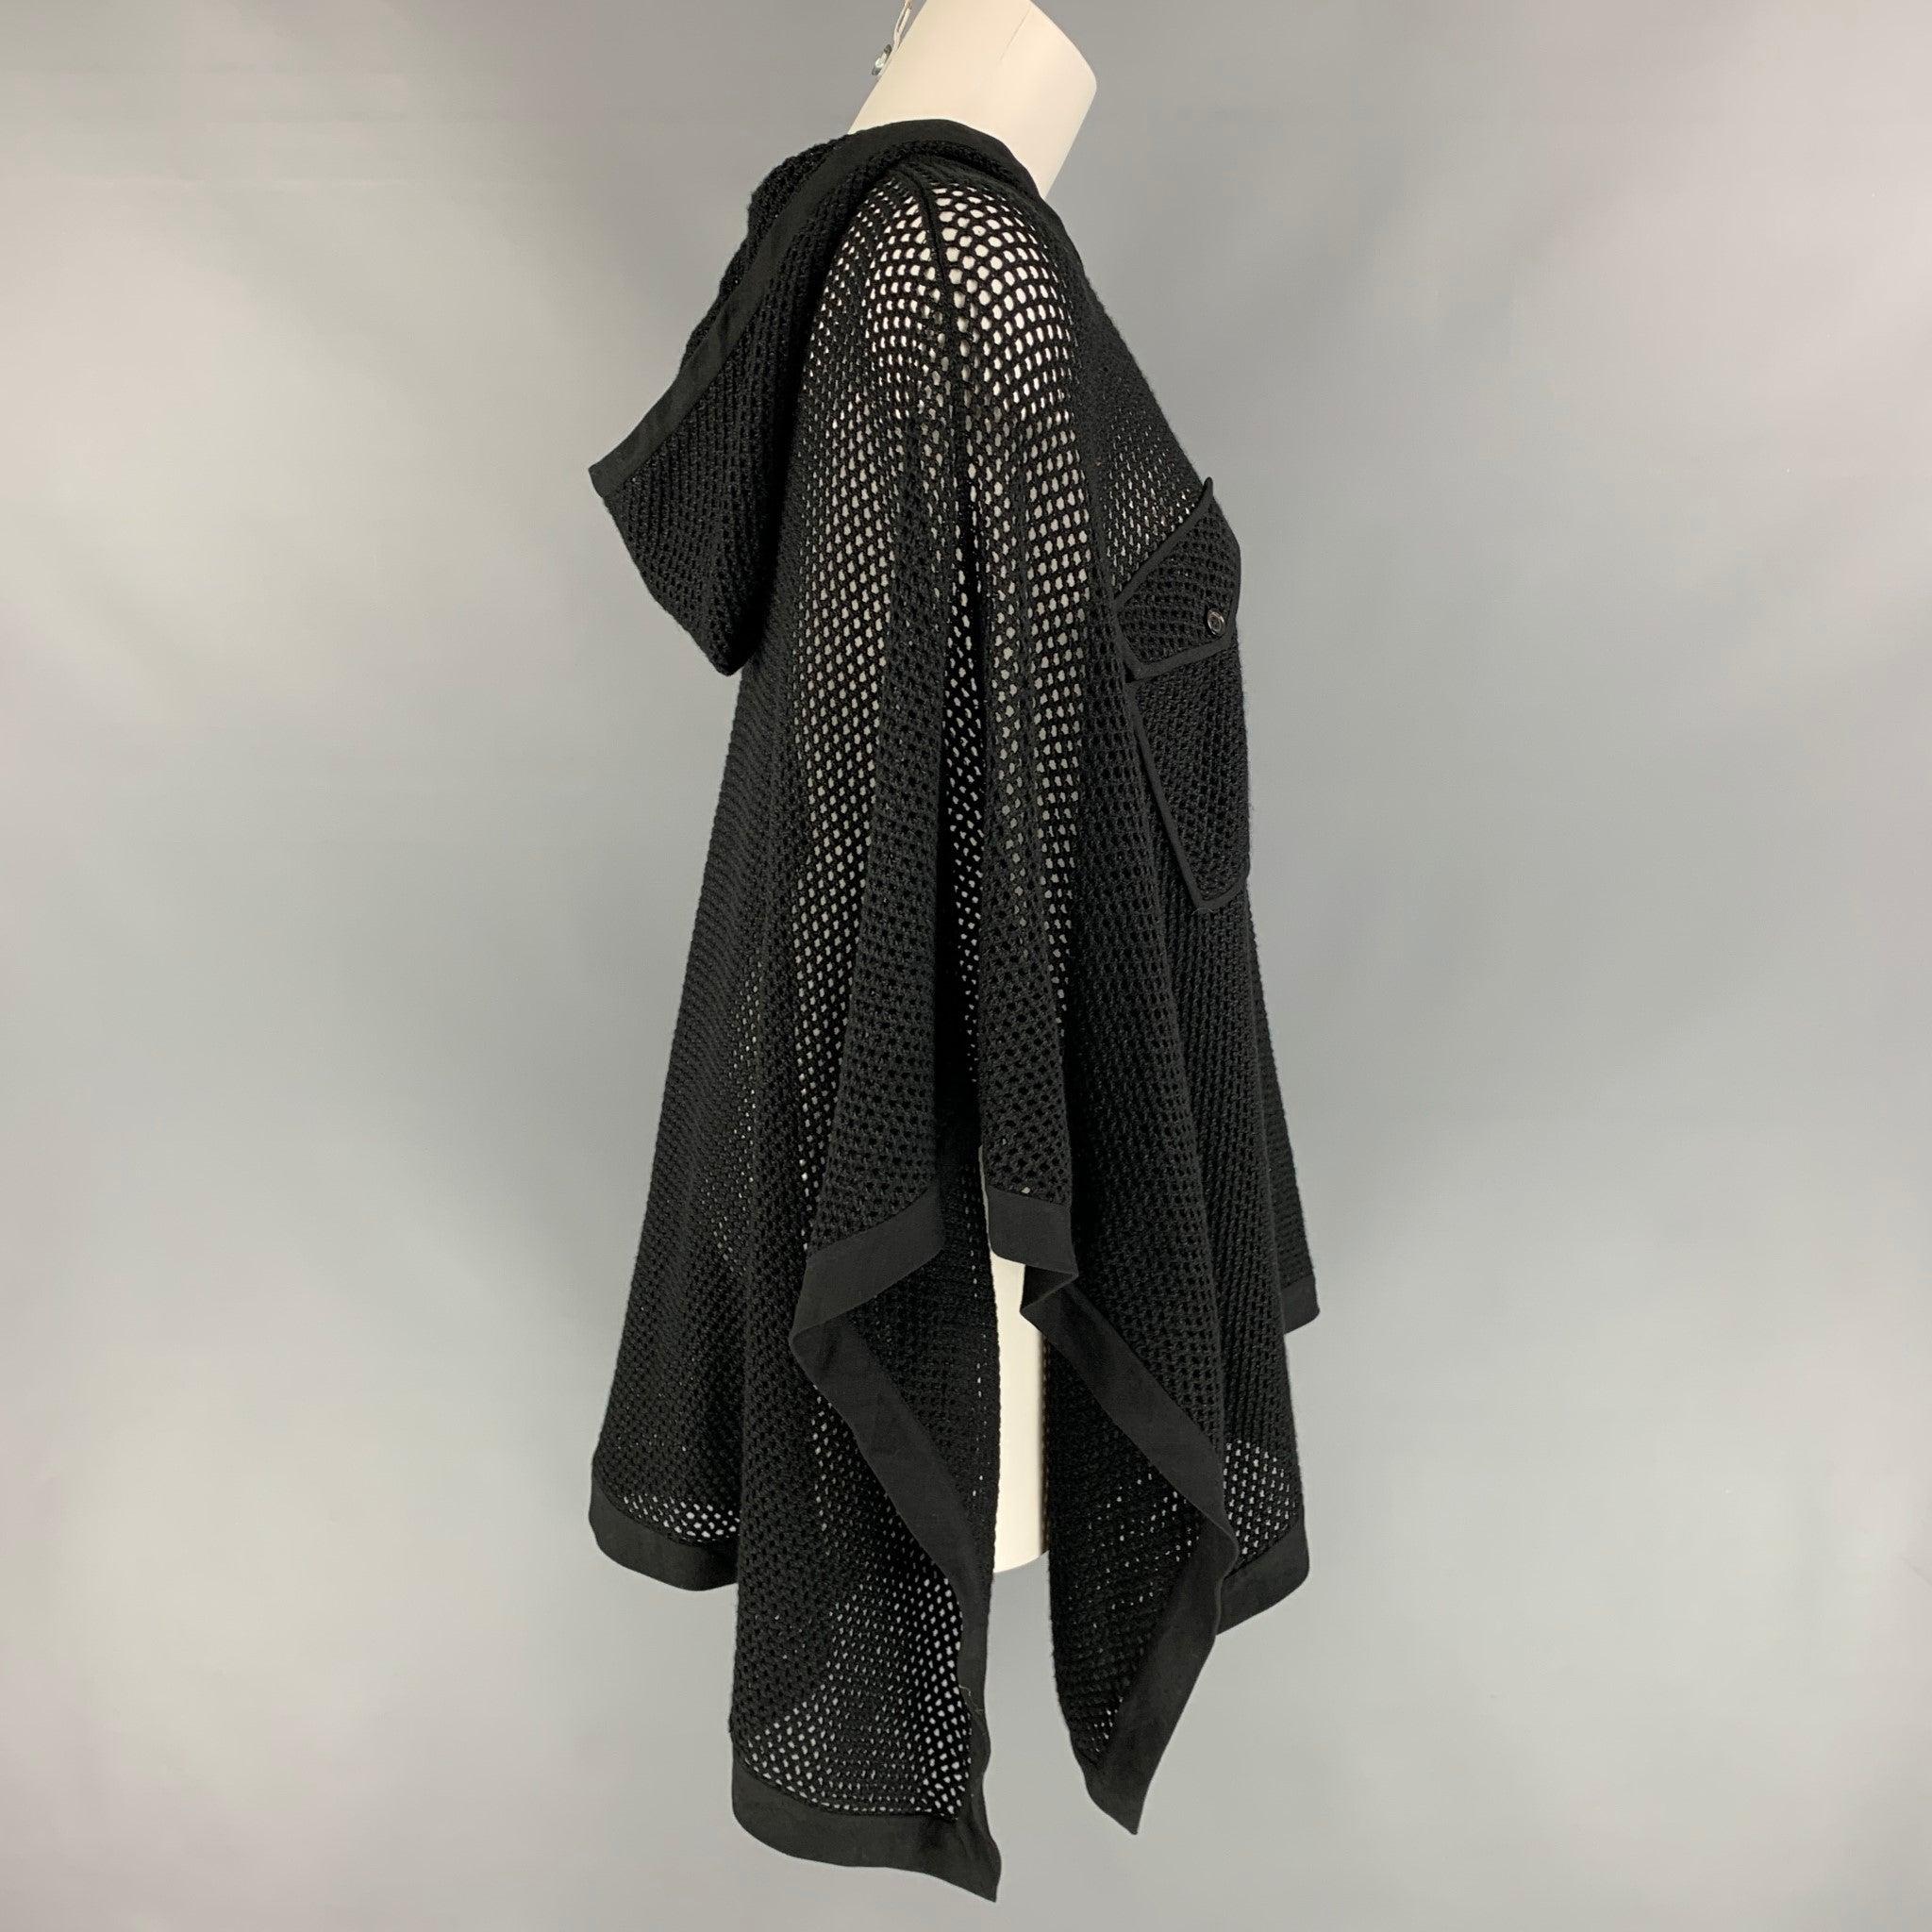 RALPH LAUREN Collection Size S Black Knit See Through Hooded Cape In Good Condition For Sale In San Francisco, CA